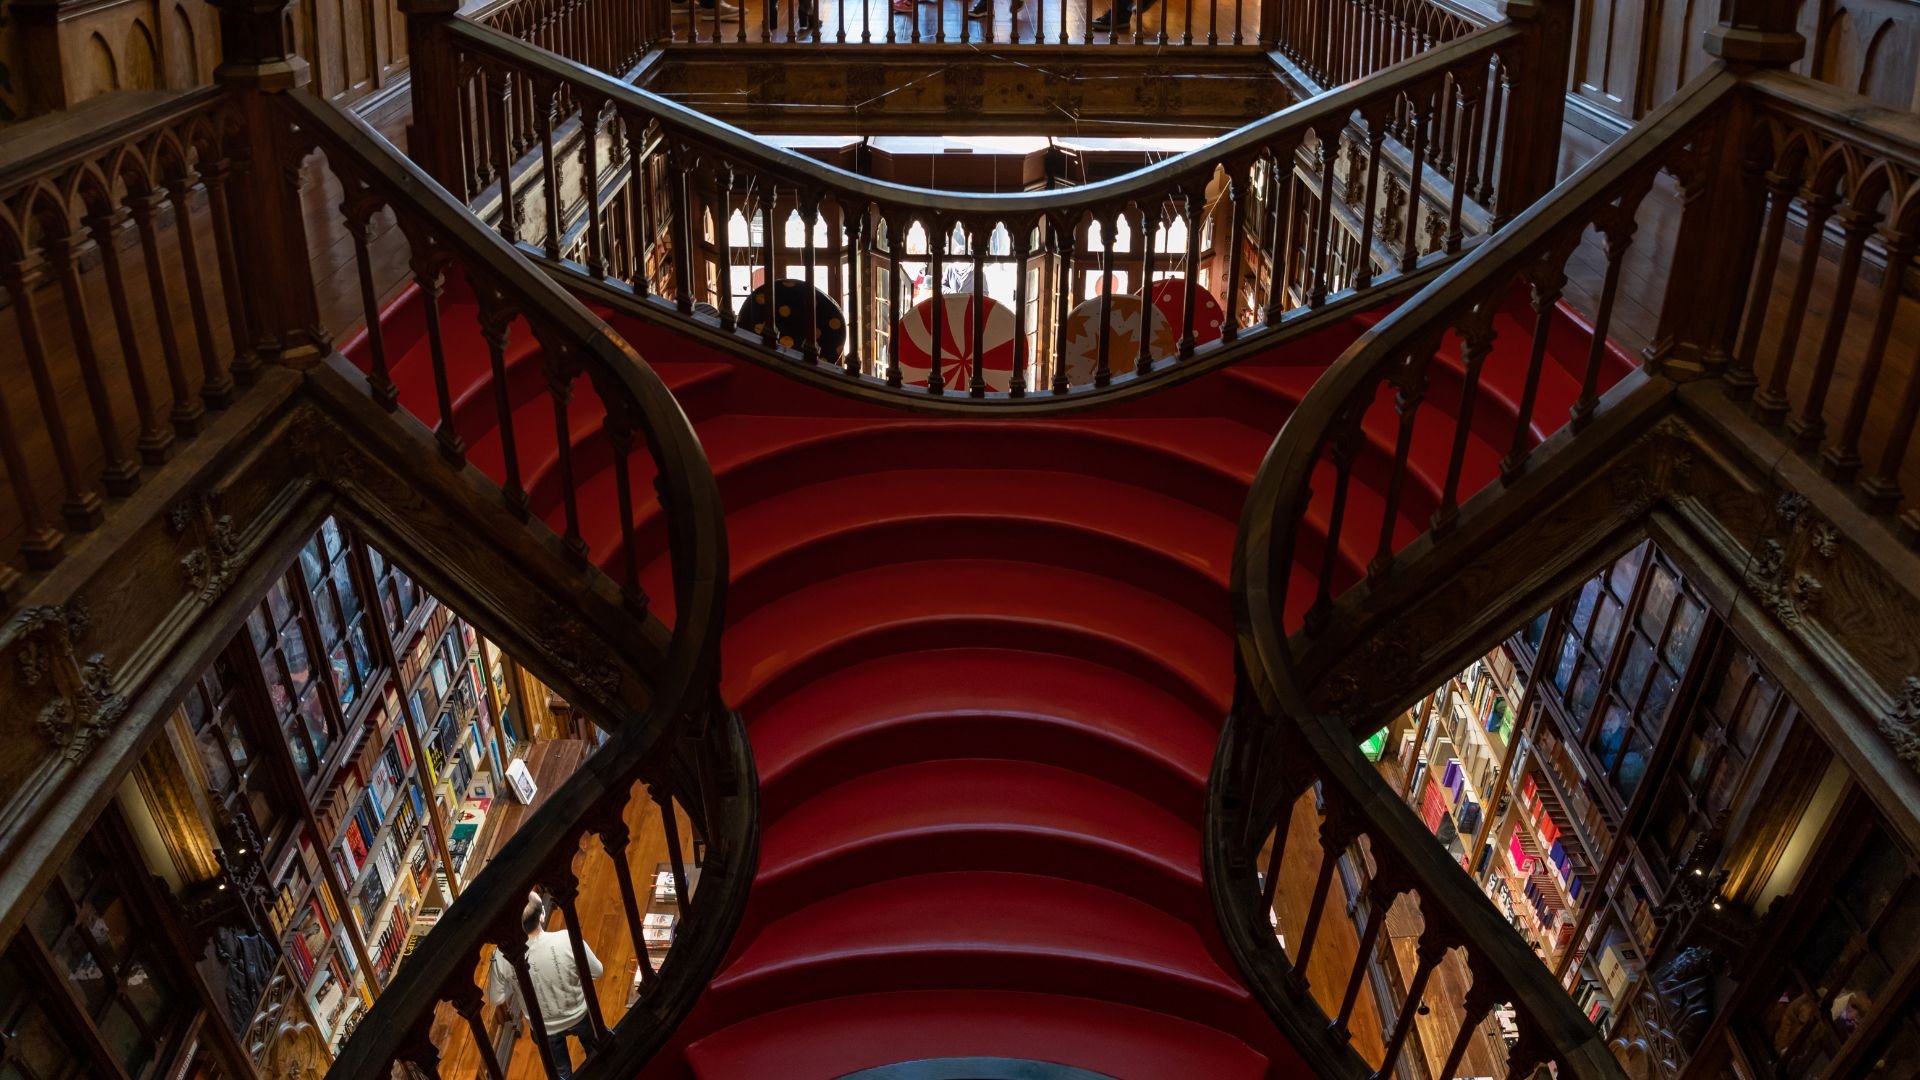 Interior of Livraria Lello, a historic bookstore in Porto, Portugal, known for its stunning Neo-Gothic architecture, intricate wooden staircases, and ornate bookshelves